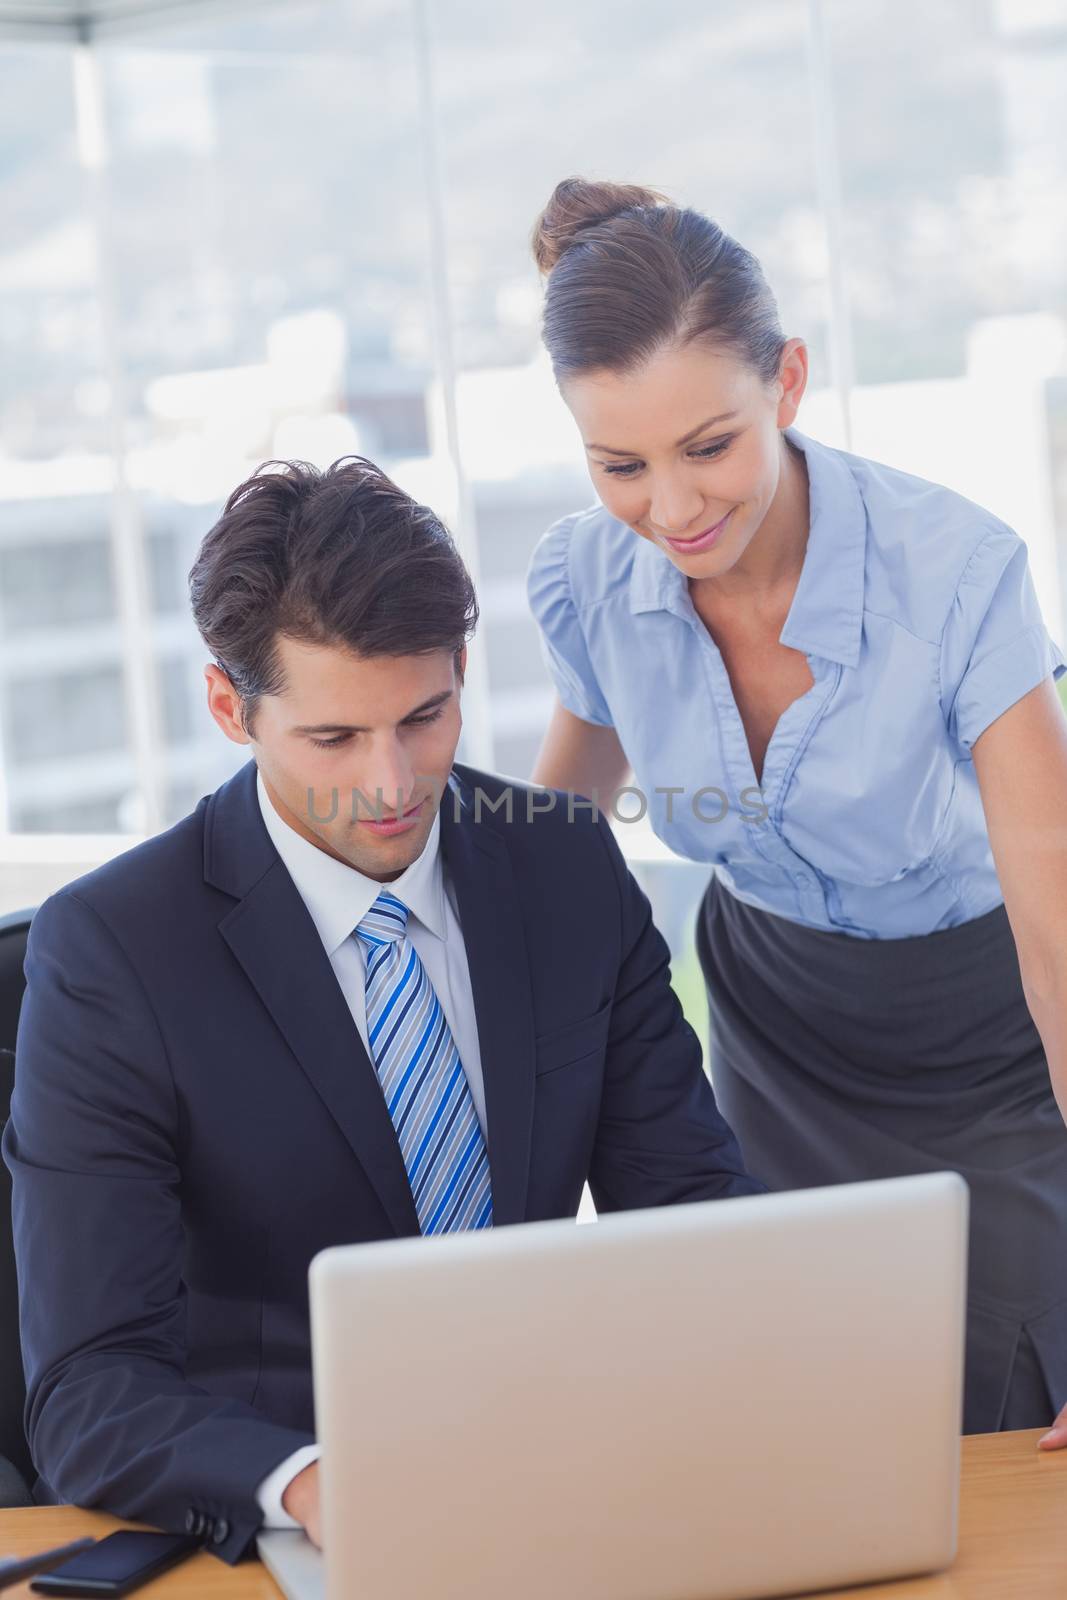 Business people smiling and working together with a laptop in the office